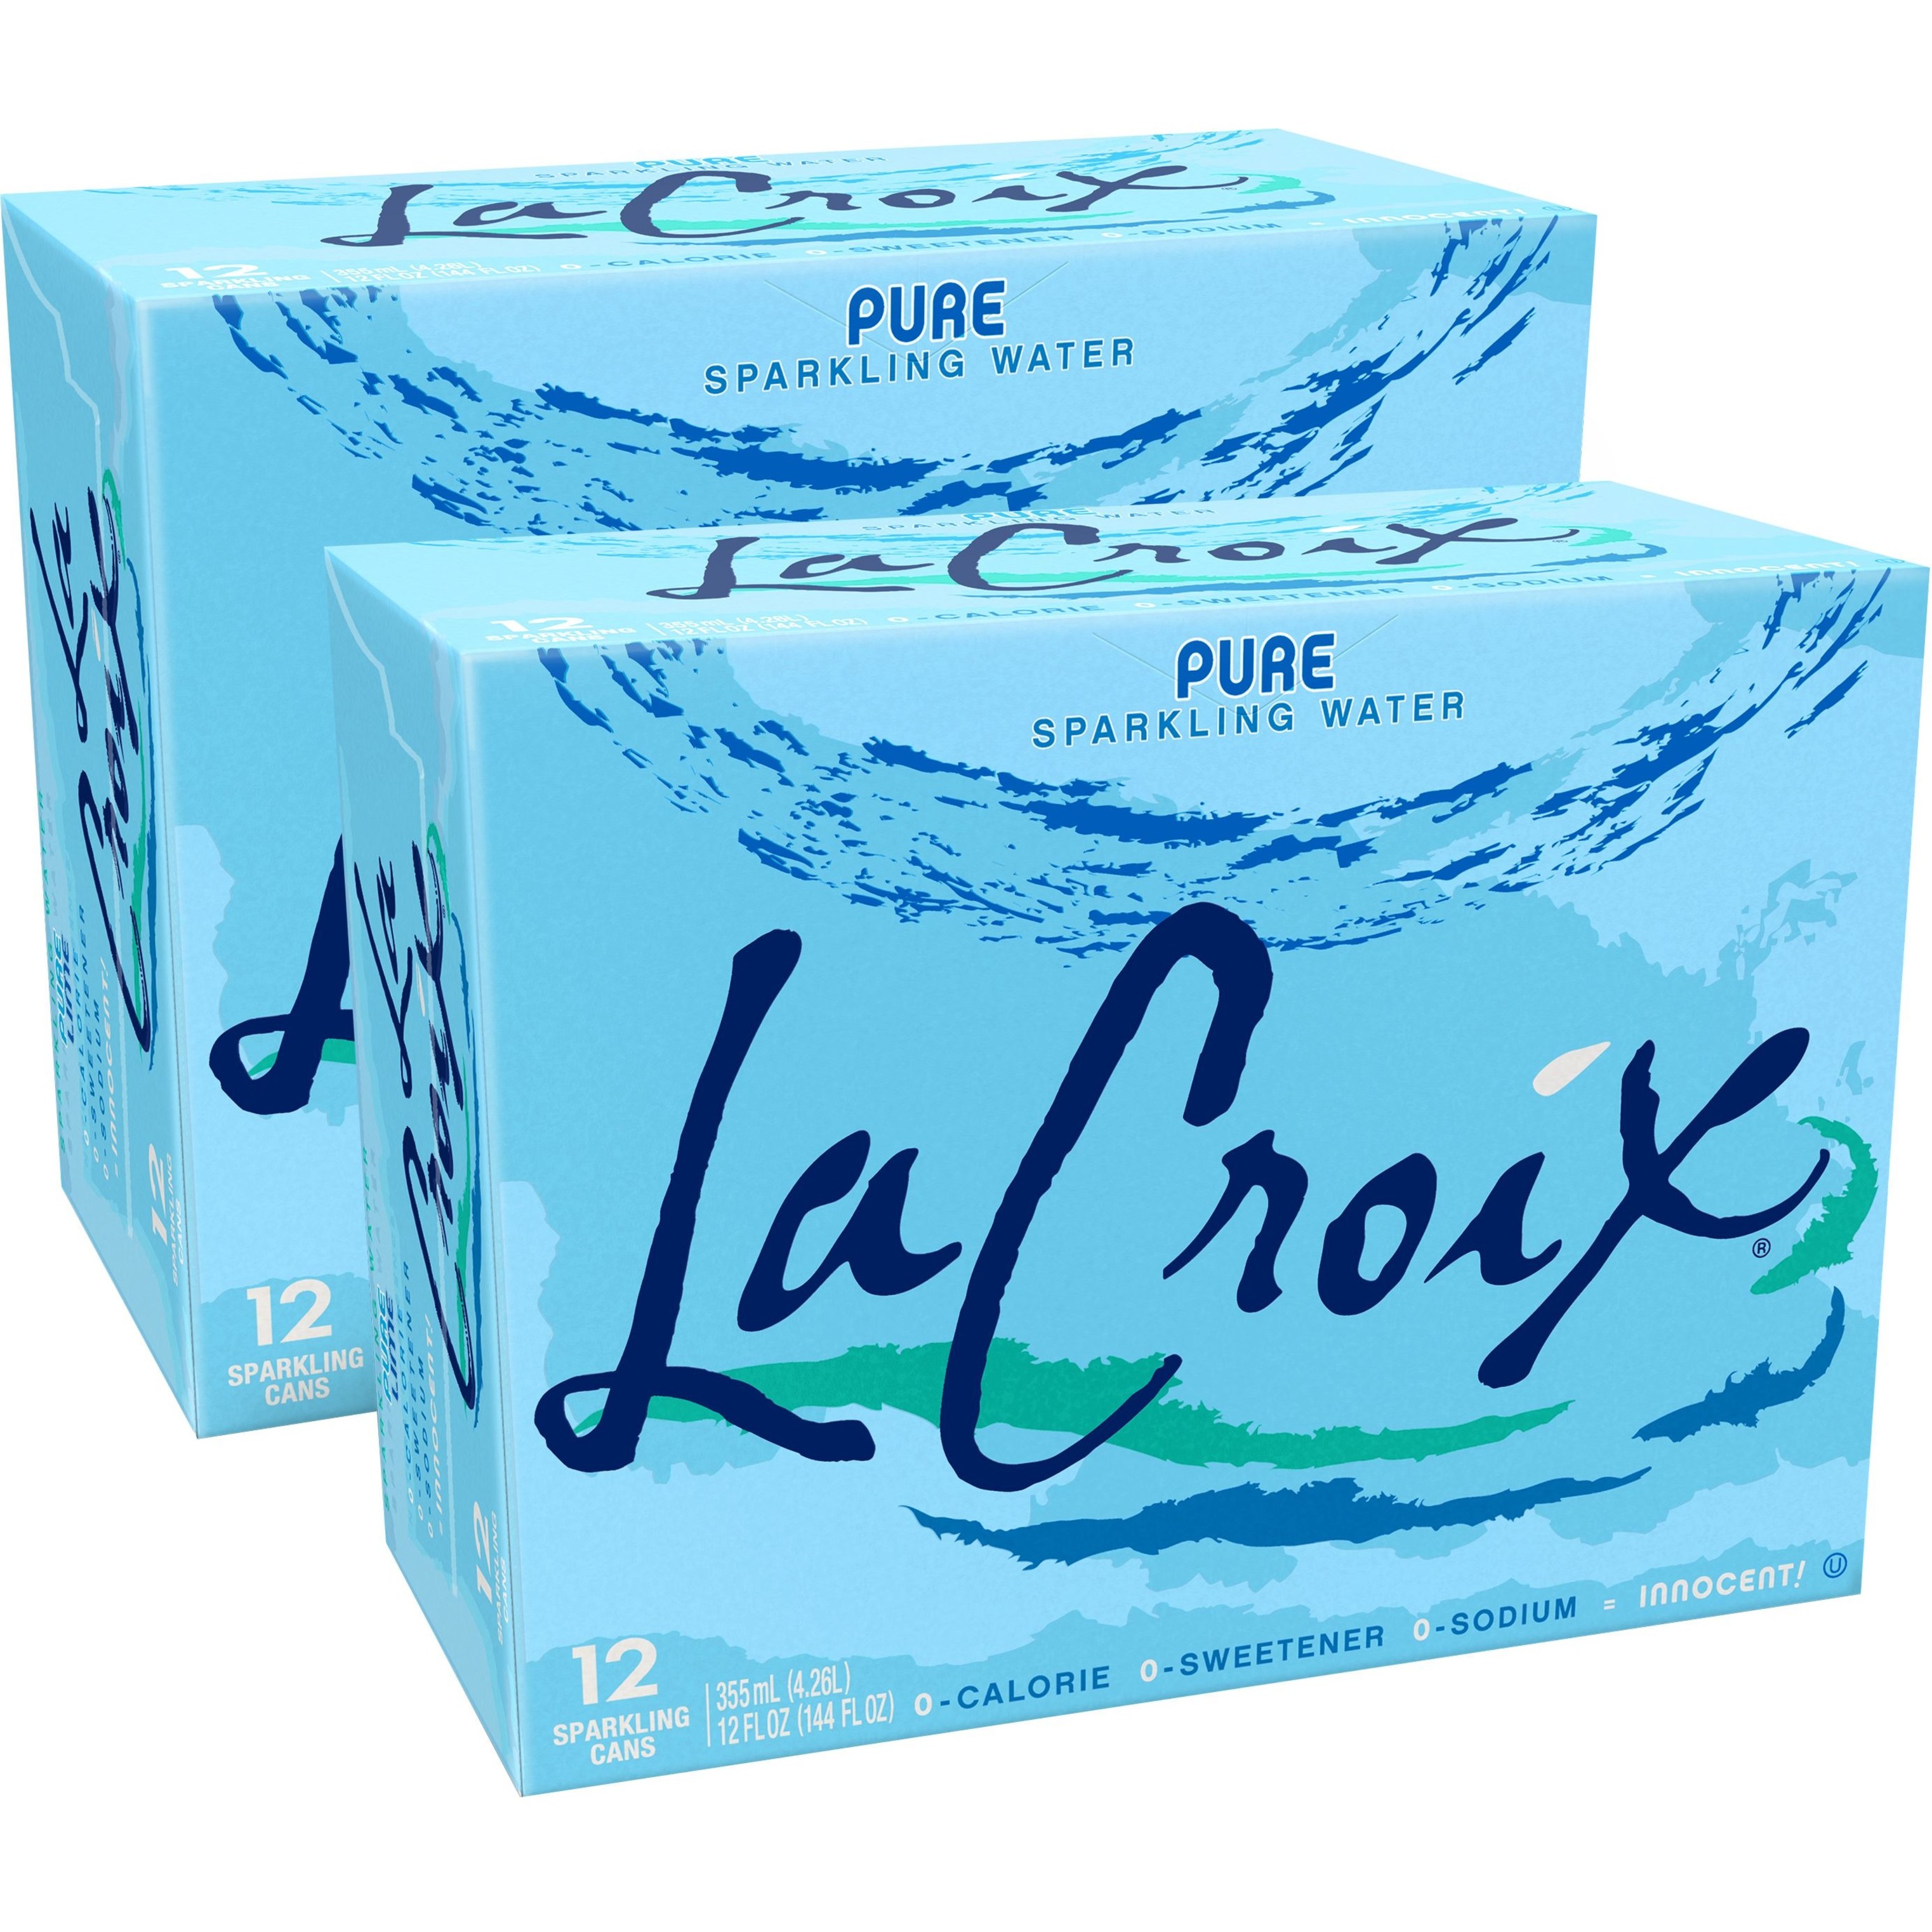 LaCroix Sparkling Water, Pure- 2/12 packs 12 oz - image 1 of 6